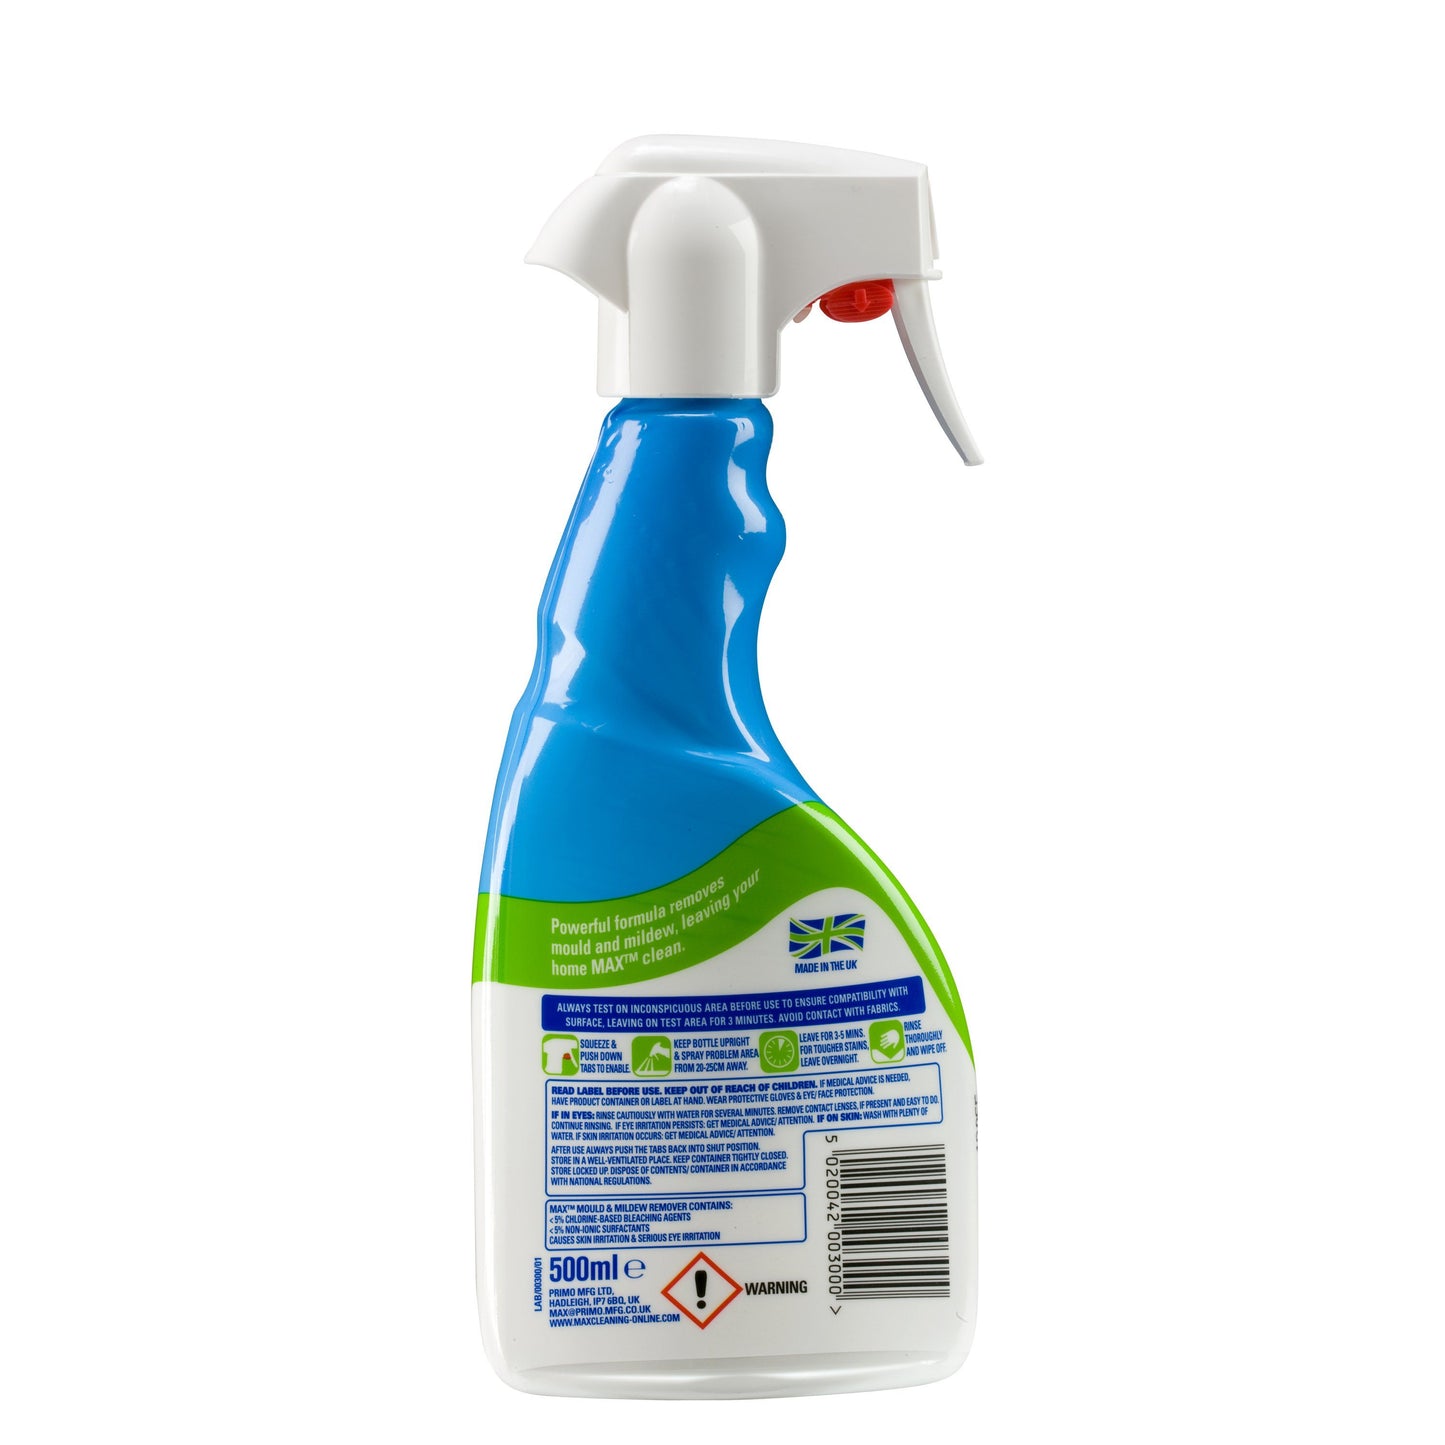 MAX Clean Mould & Mildew Remover 500ml - Bloom Concept